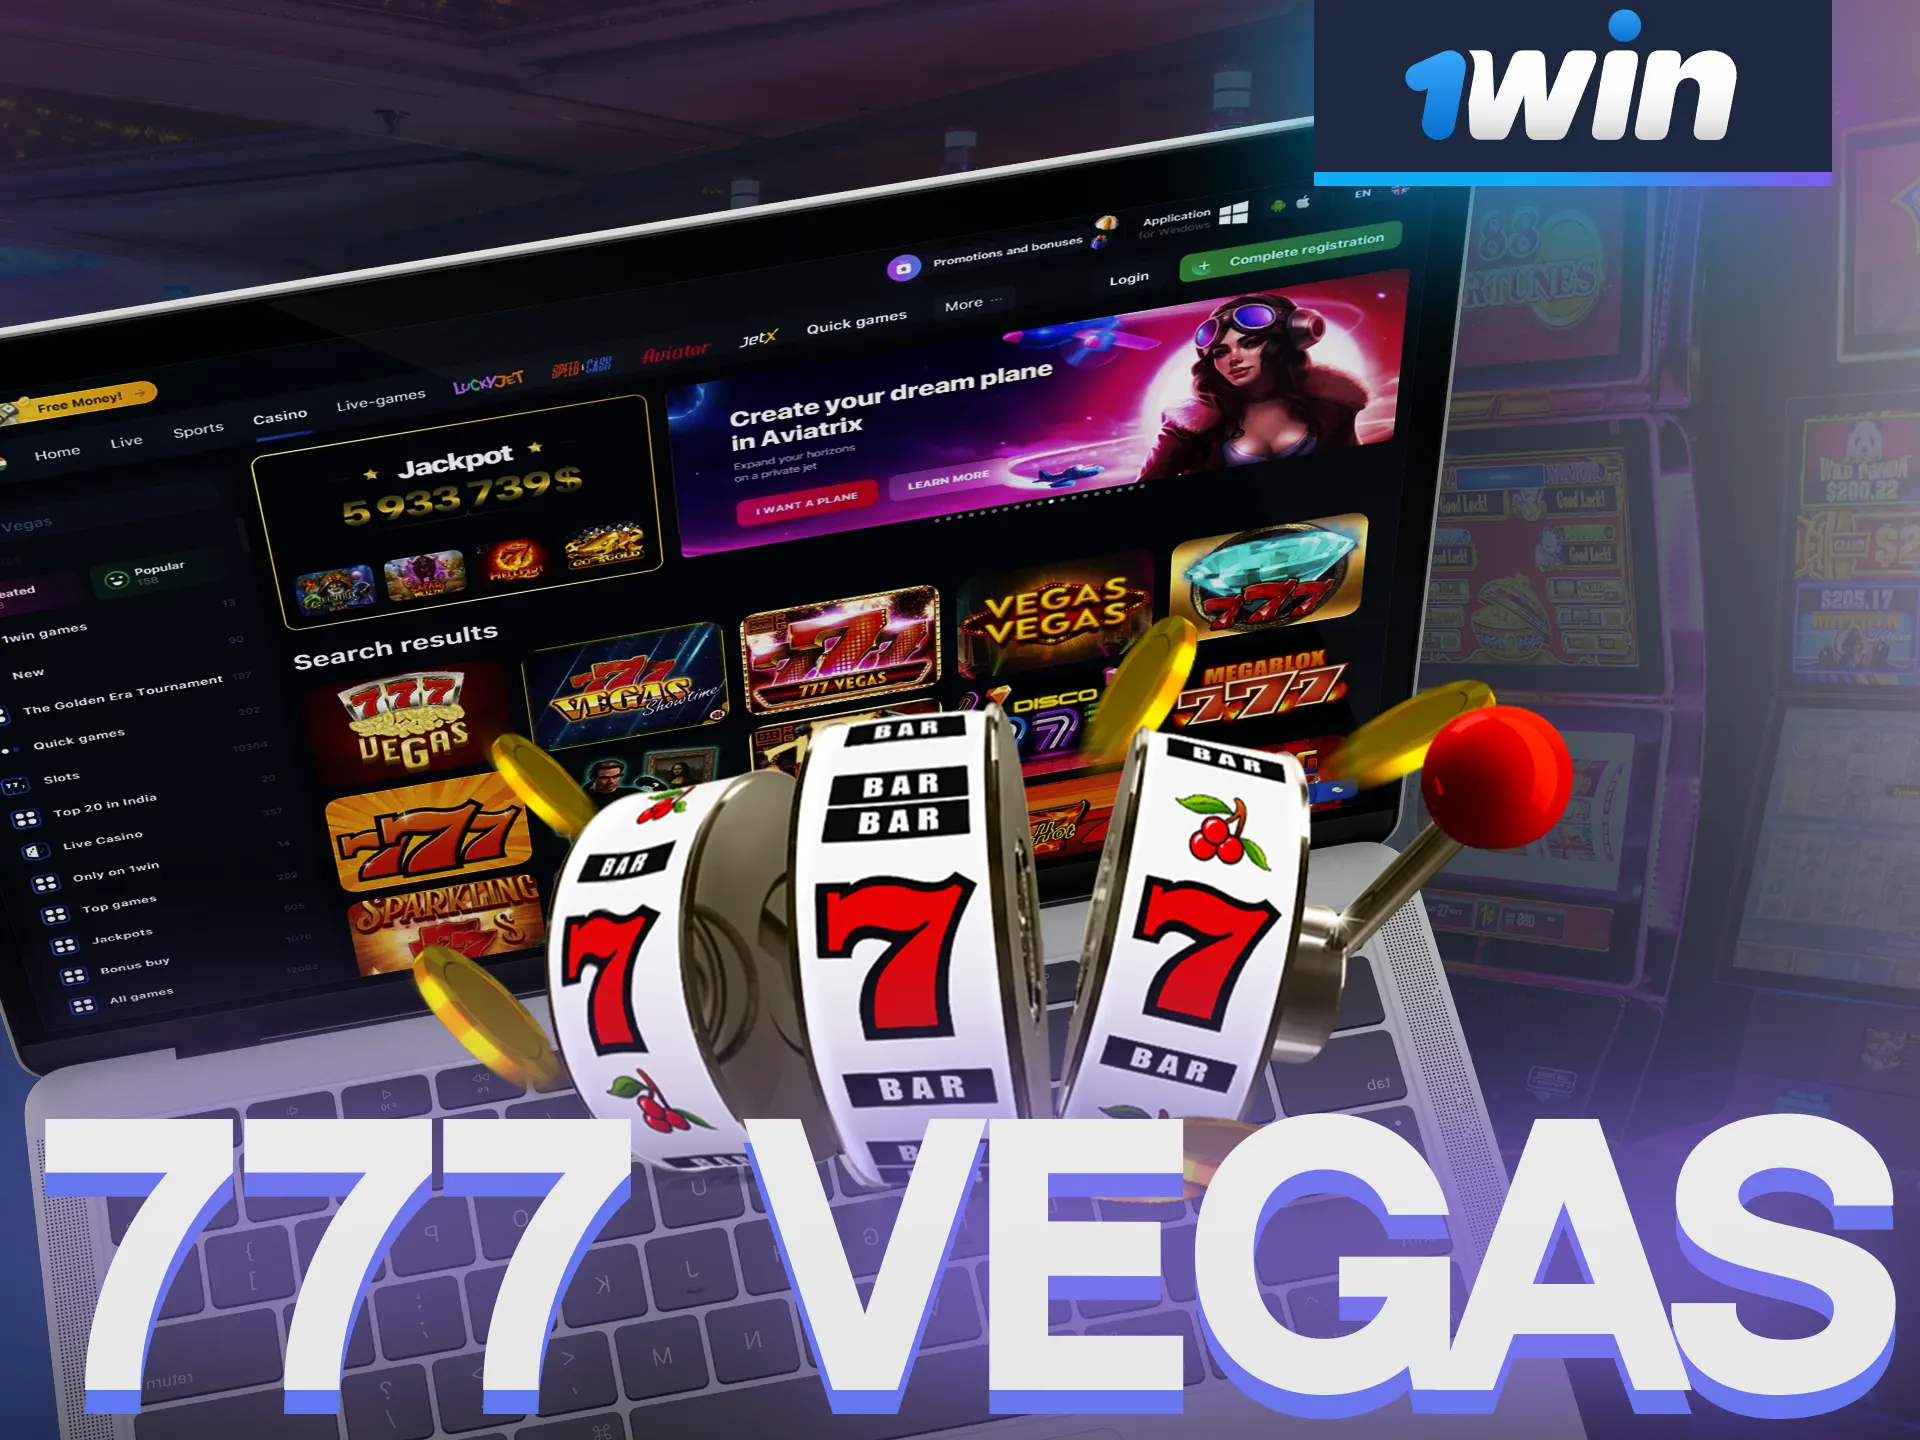 Play at 777 Vegas on 1Win.